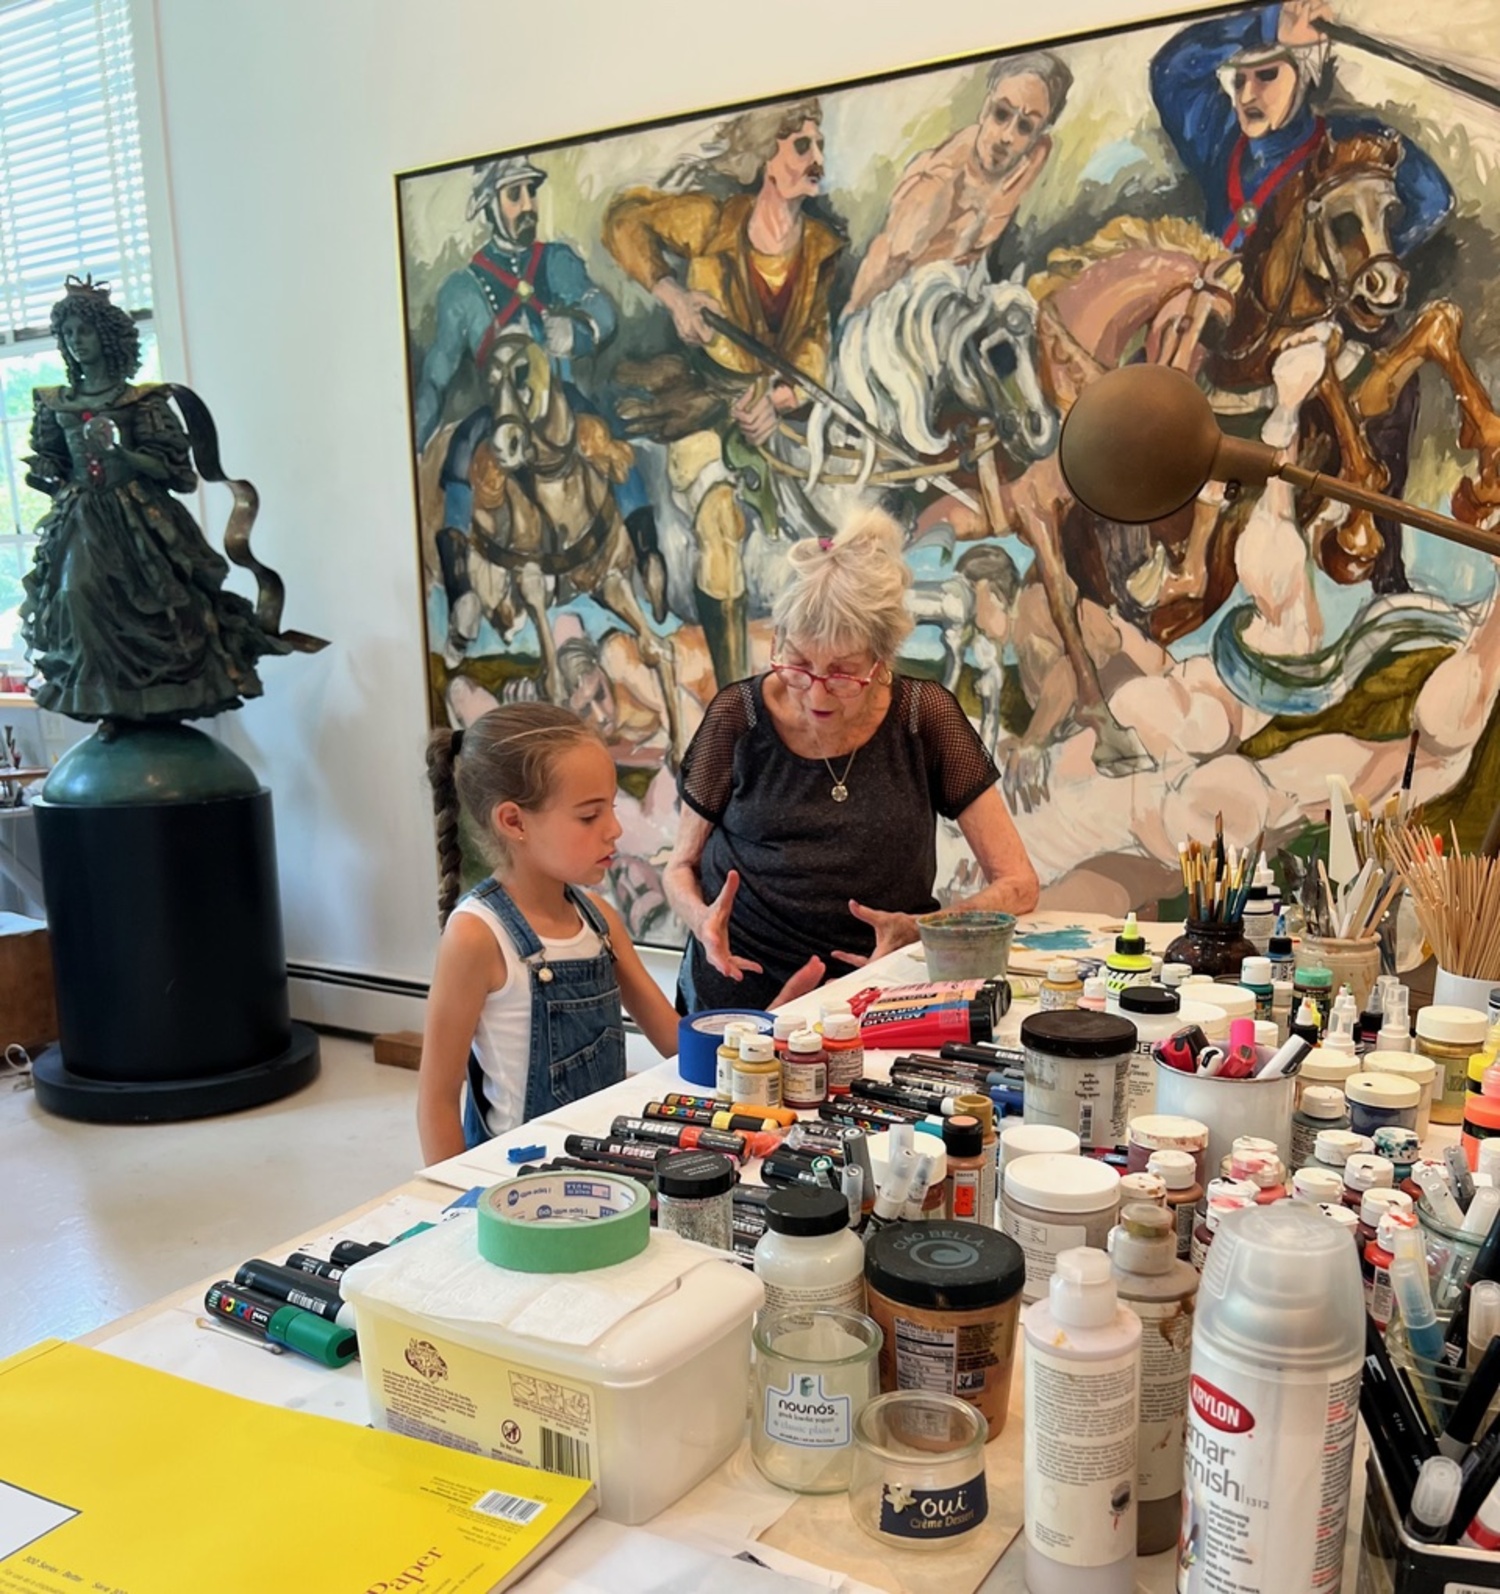 Audrey Flack, at age 92, teaches a young fan, Gia Rozenberg, about art against a backdrop of her painting, 